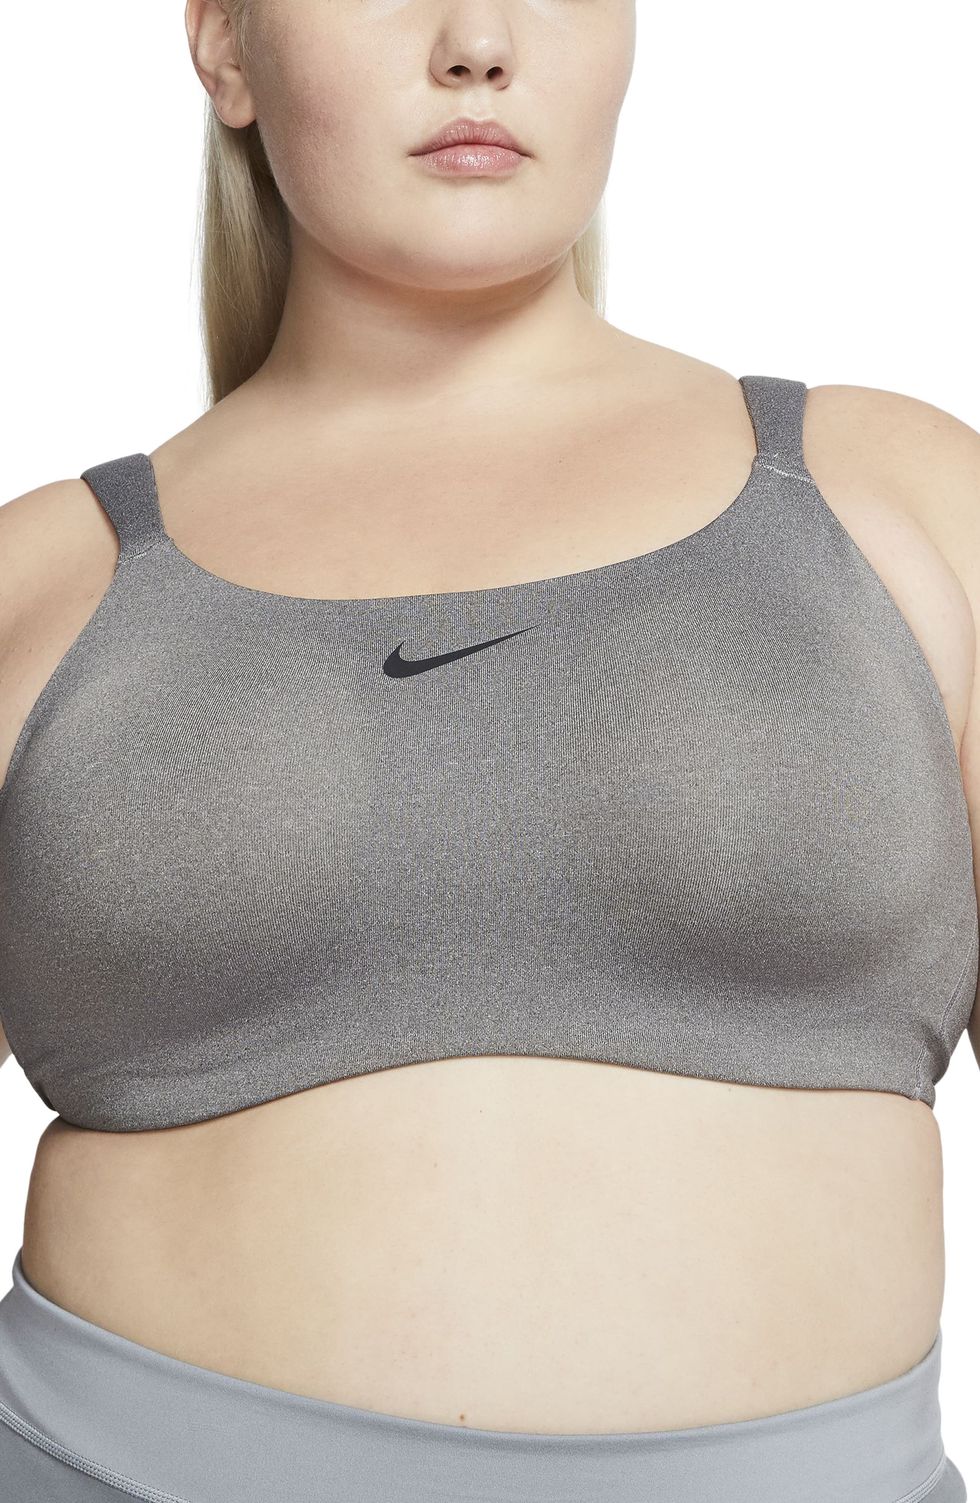 Buy Adidas Sports Bras Online In India At Best Price Offers